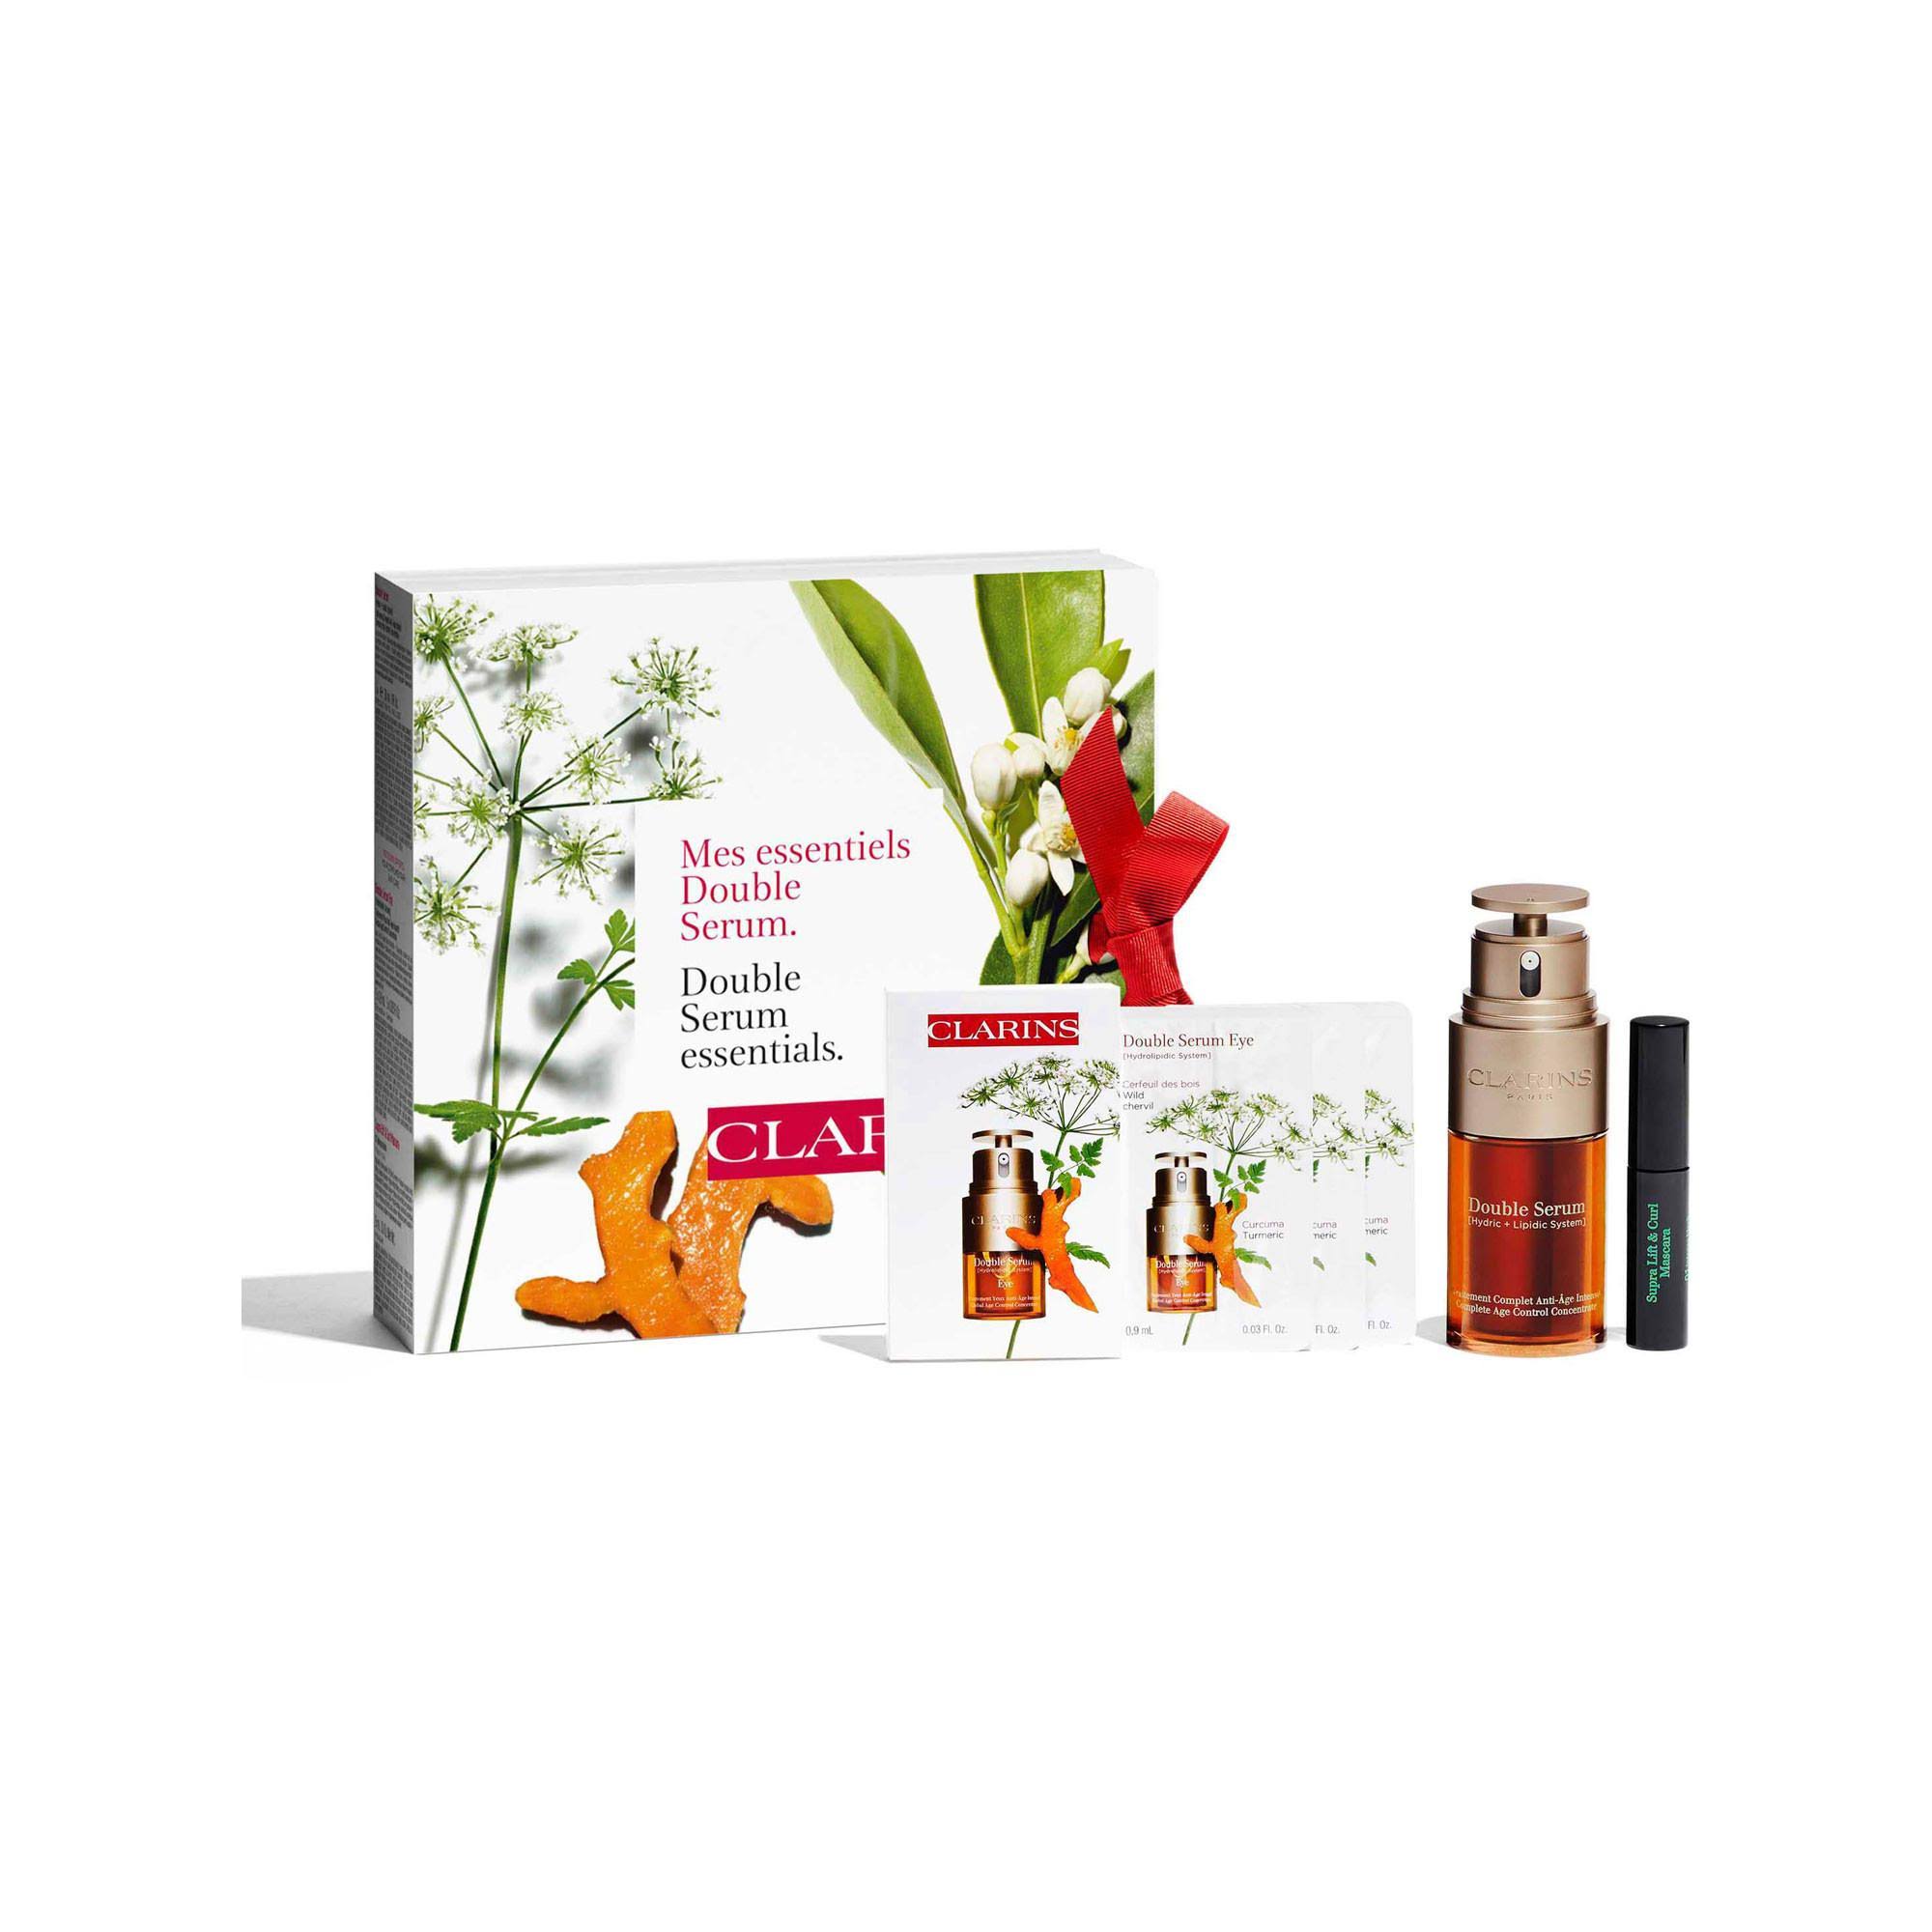 Clarins Double Serum Value Pack